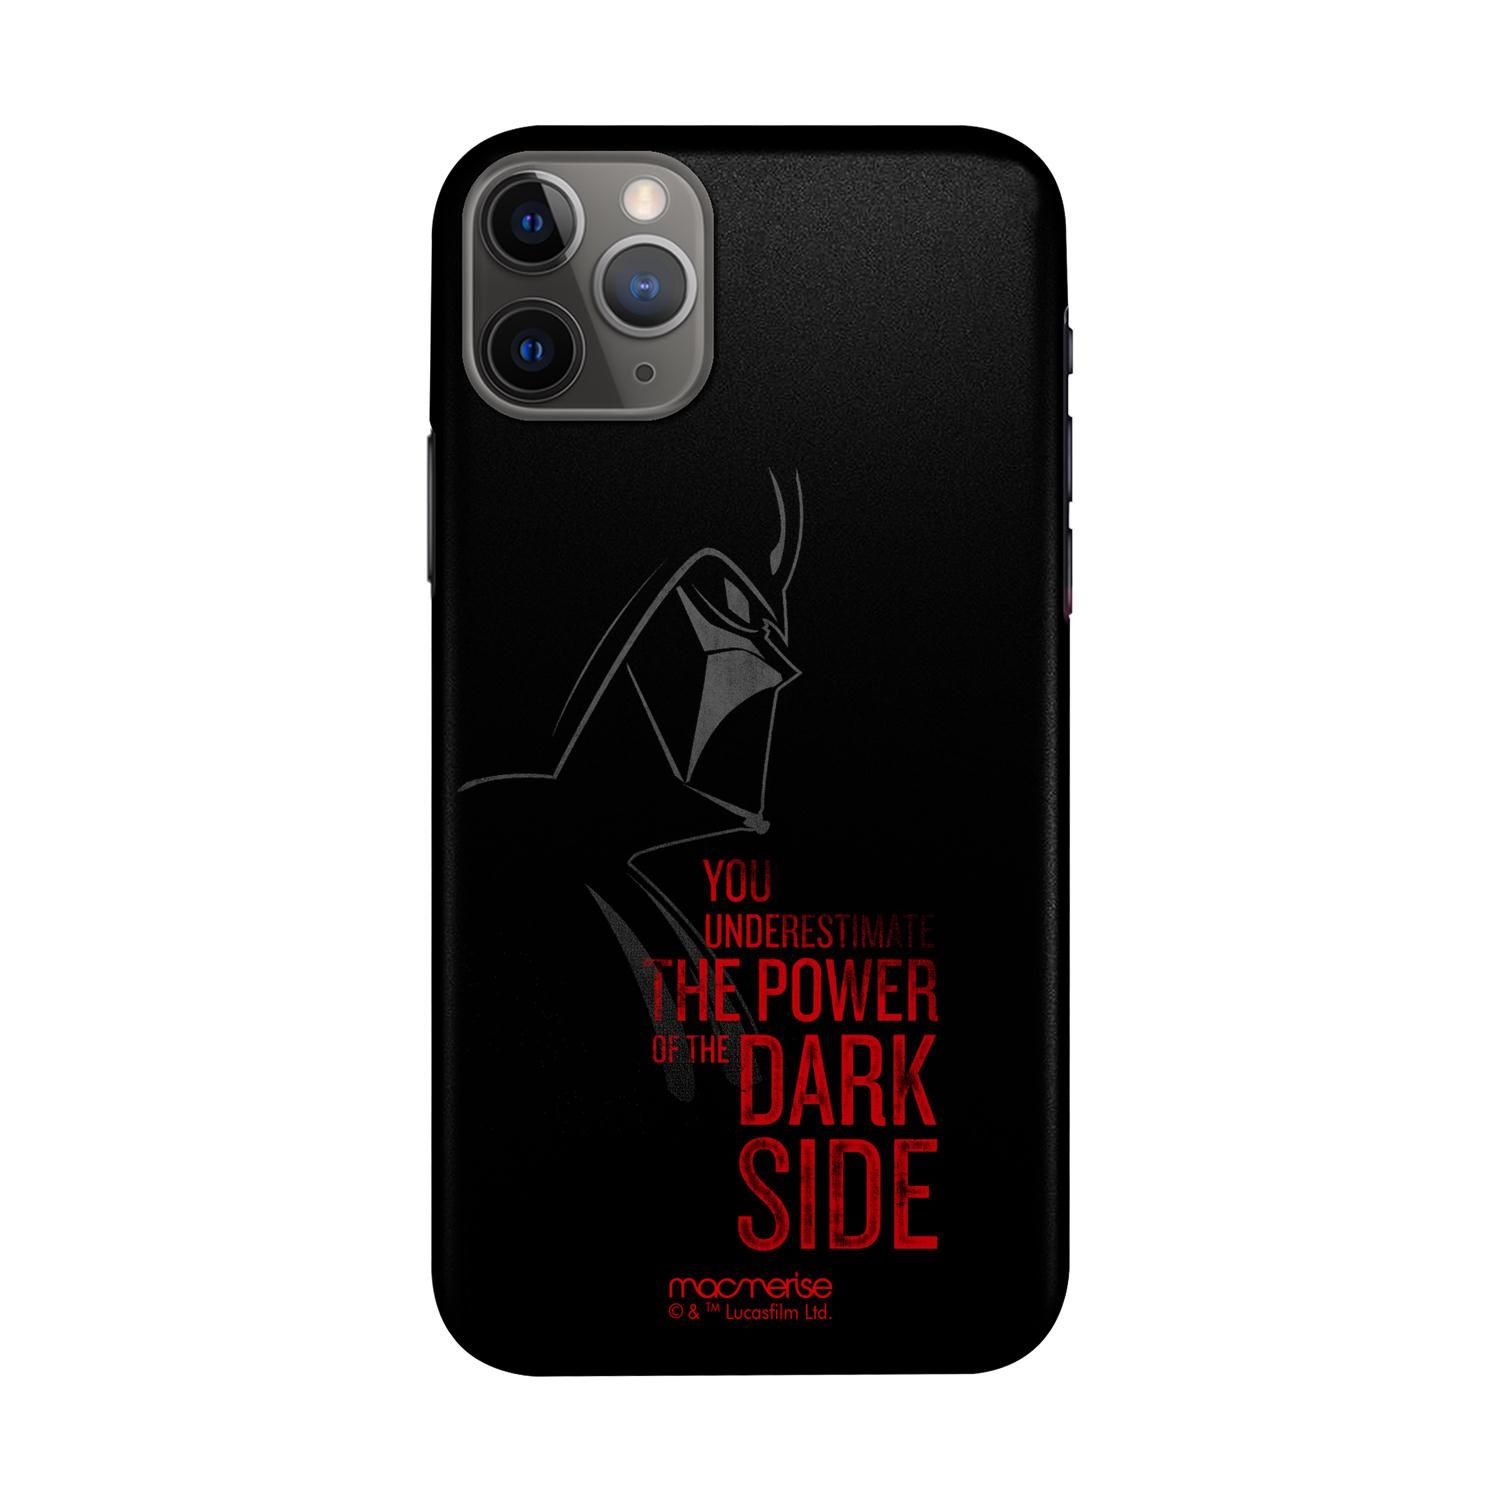 Buy The Dark Side - Sleek Phone Case for iPhone 11 Pro Max Online